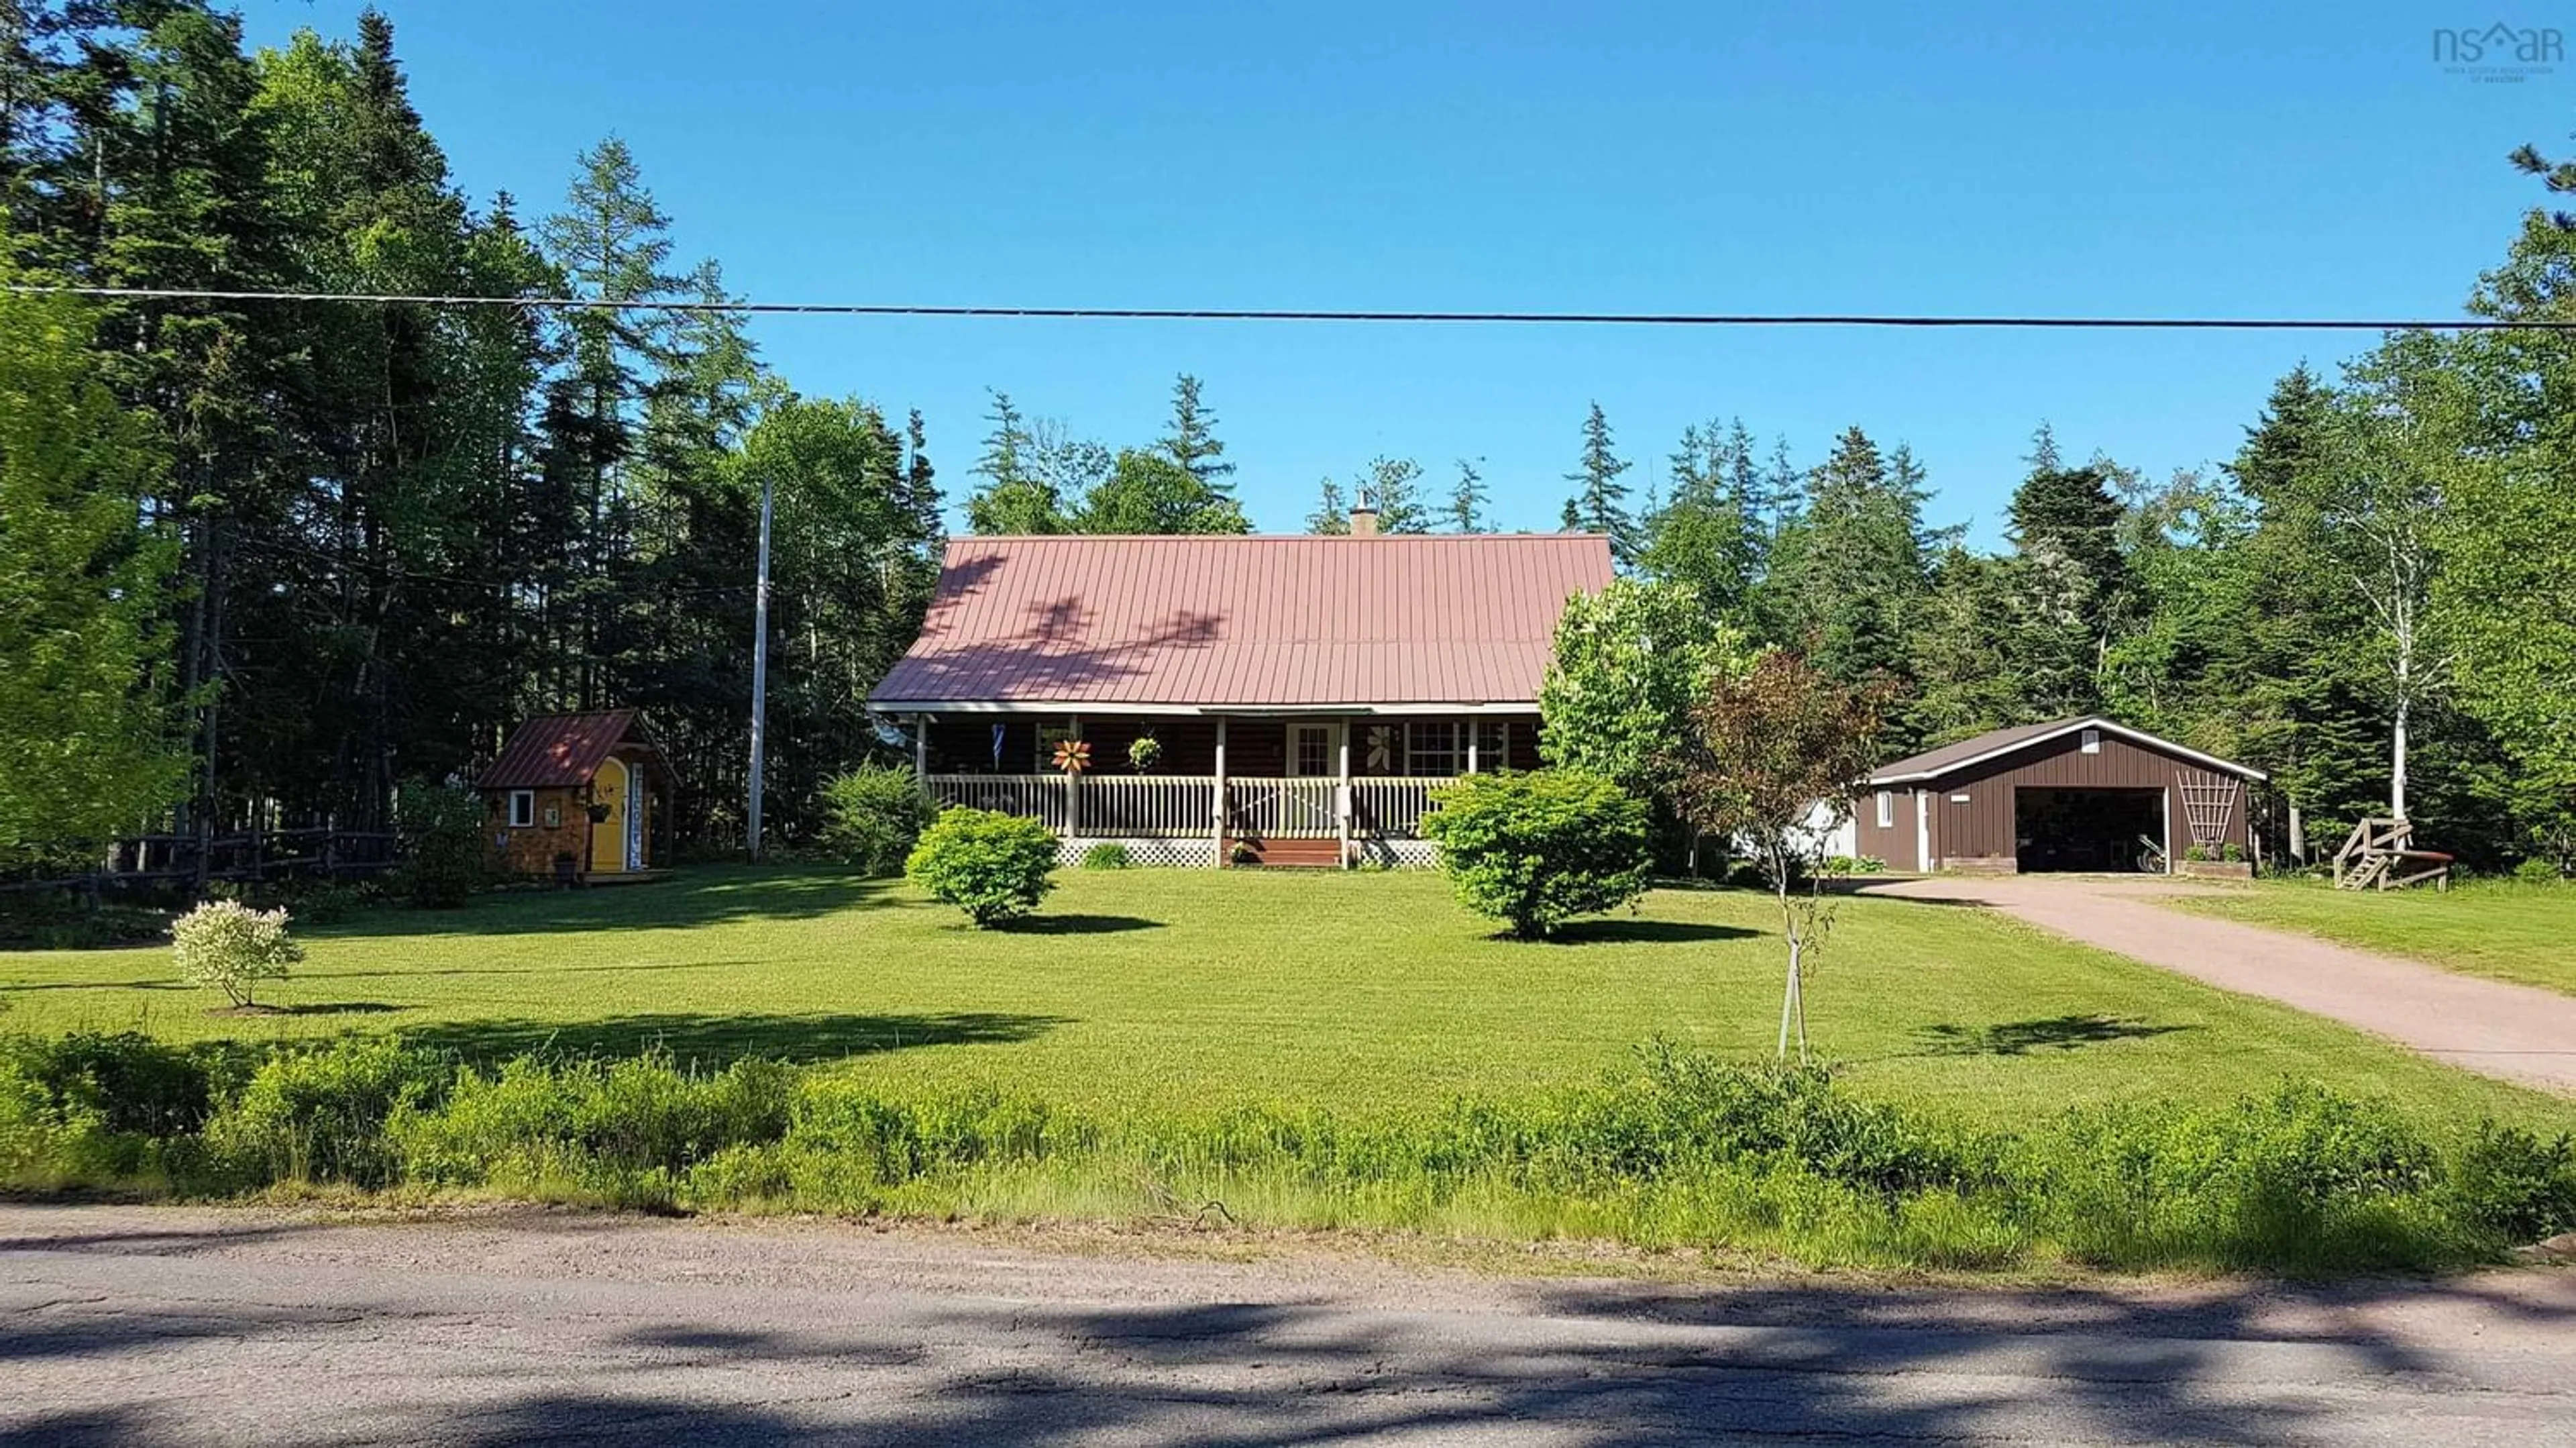 Home with unknown exterior material for 791 Two Islands Rd, Parrsboro Nova Scotia B0M 1S0